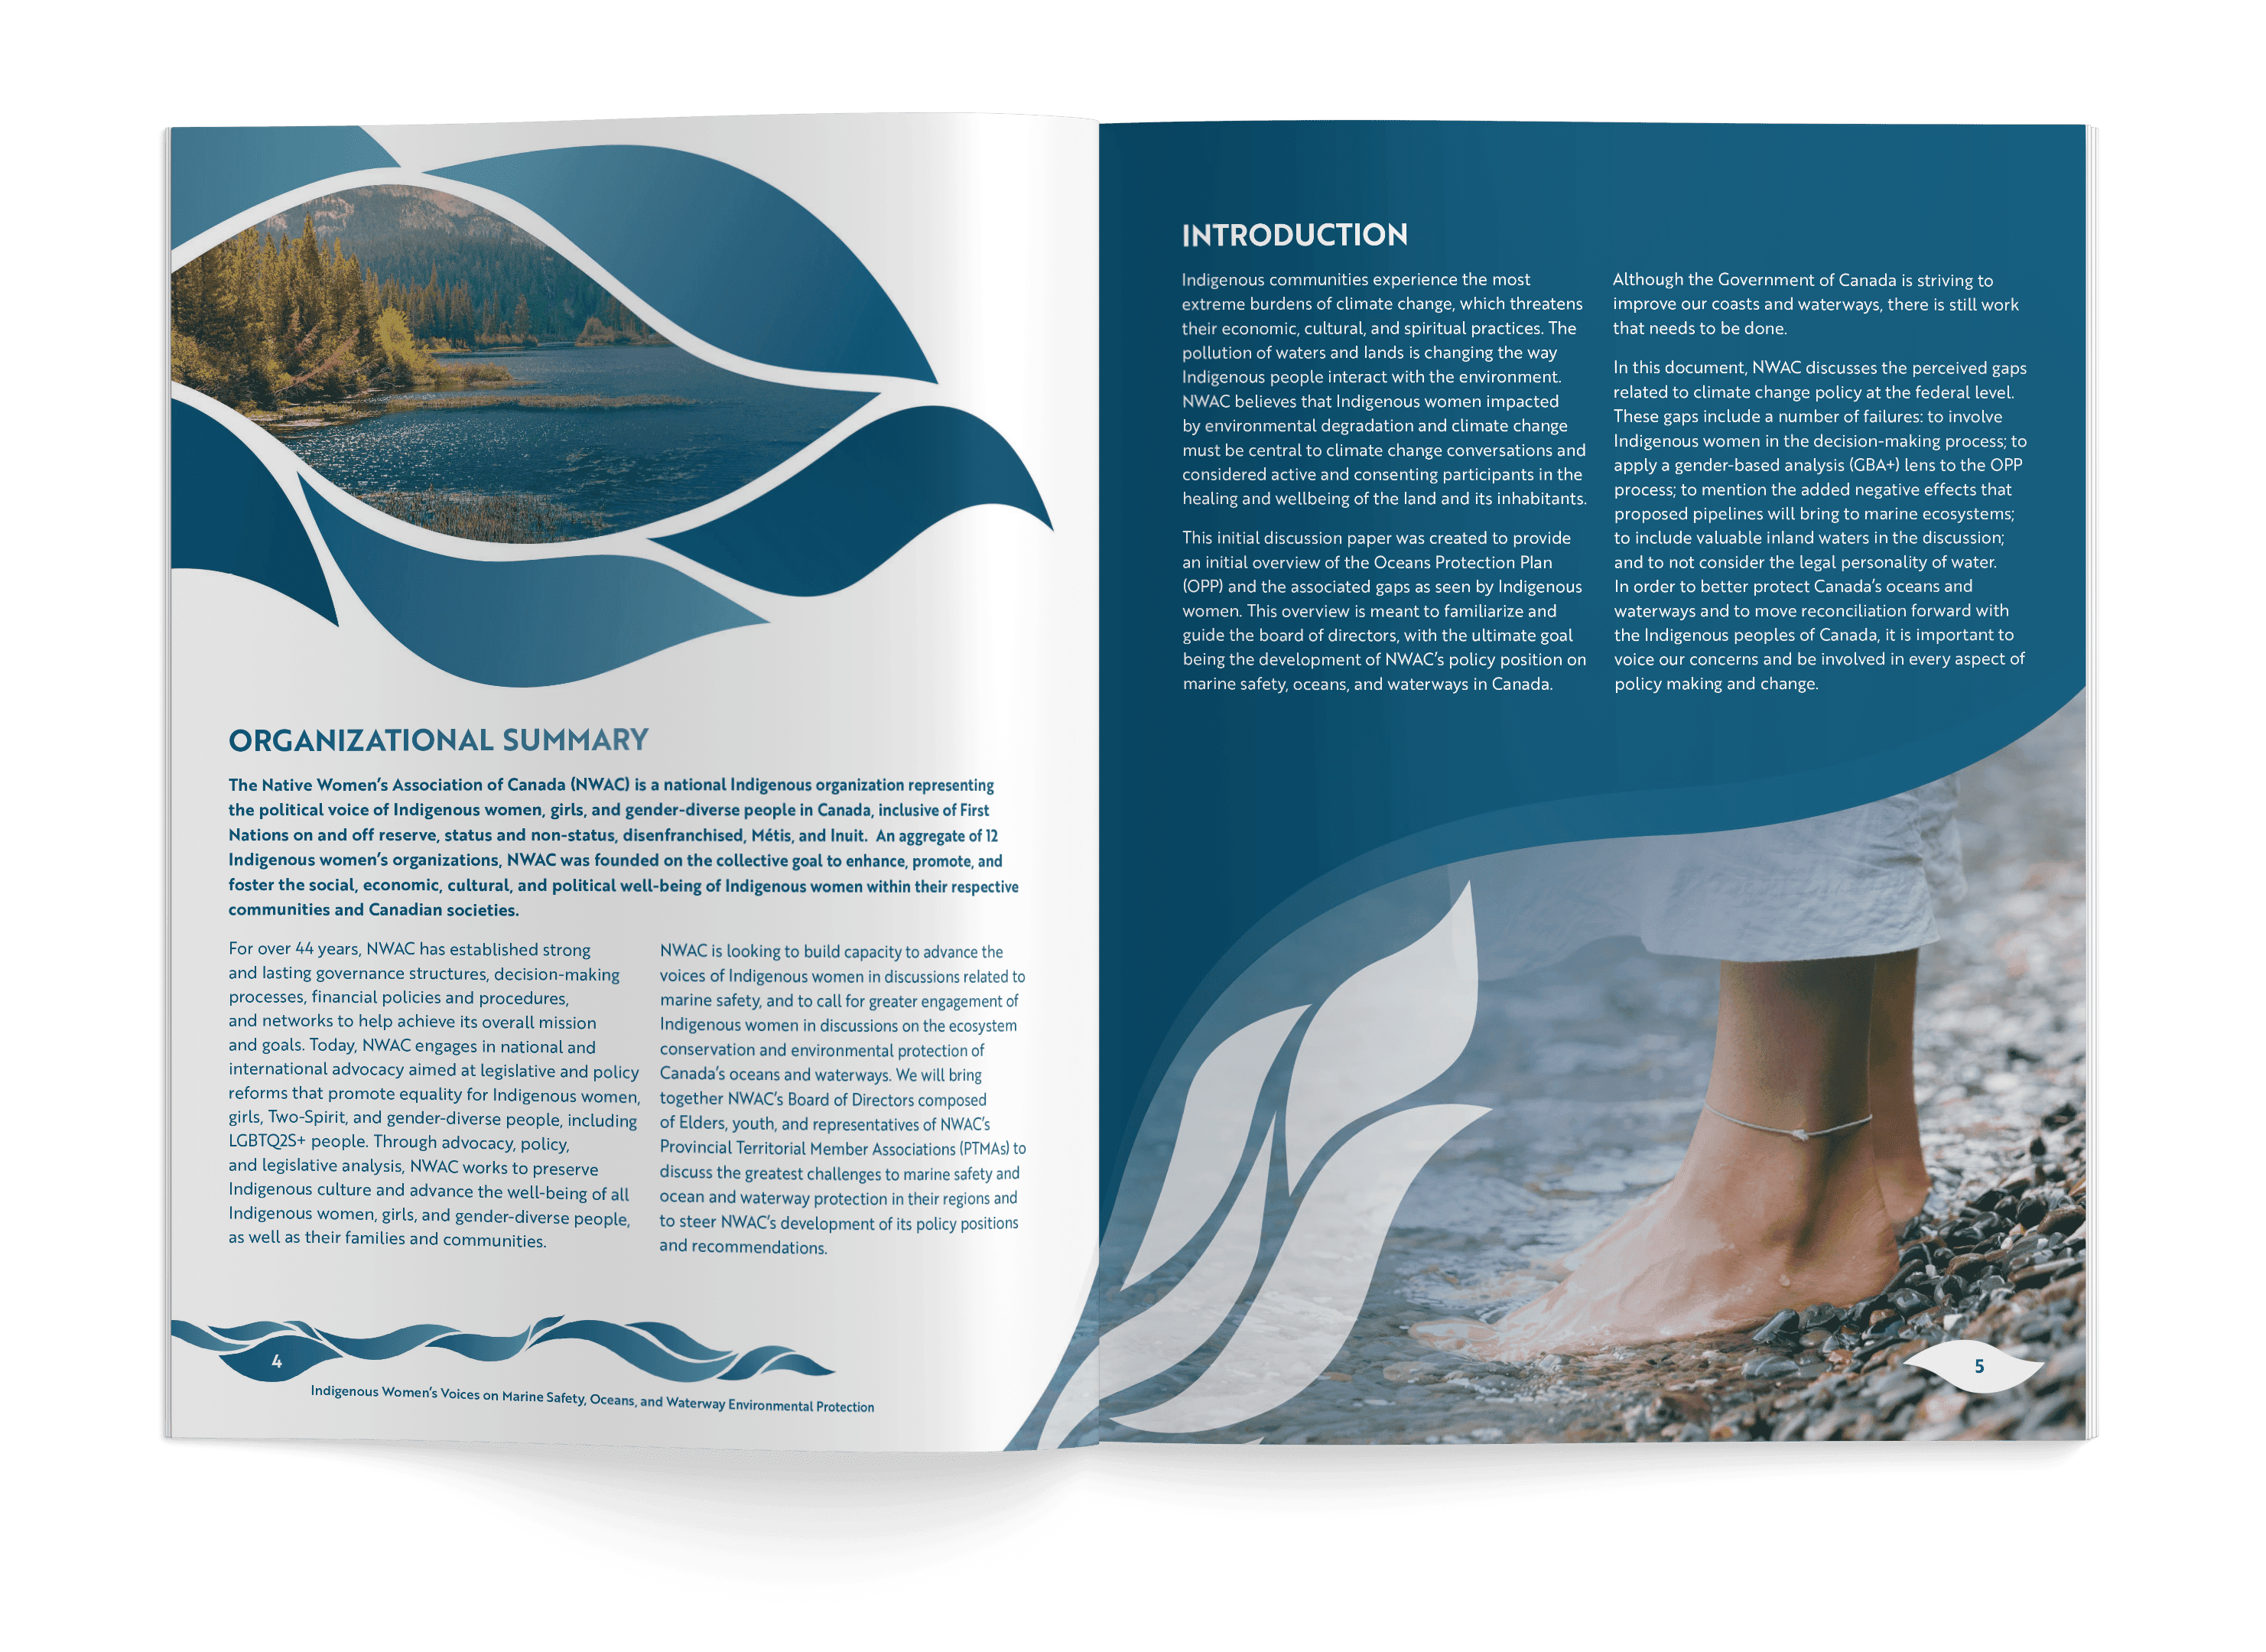 An internal spread of the NWAC Marine Safety booklet. The spread features an Organizational Summary as well as as introduction. There are blue water graphics along the pages. On the left page, the water graphic has an image of a lakeside within the largest shape, and on the right page there is an image of a woman standing with their feet in the water on a rocky beach.